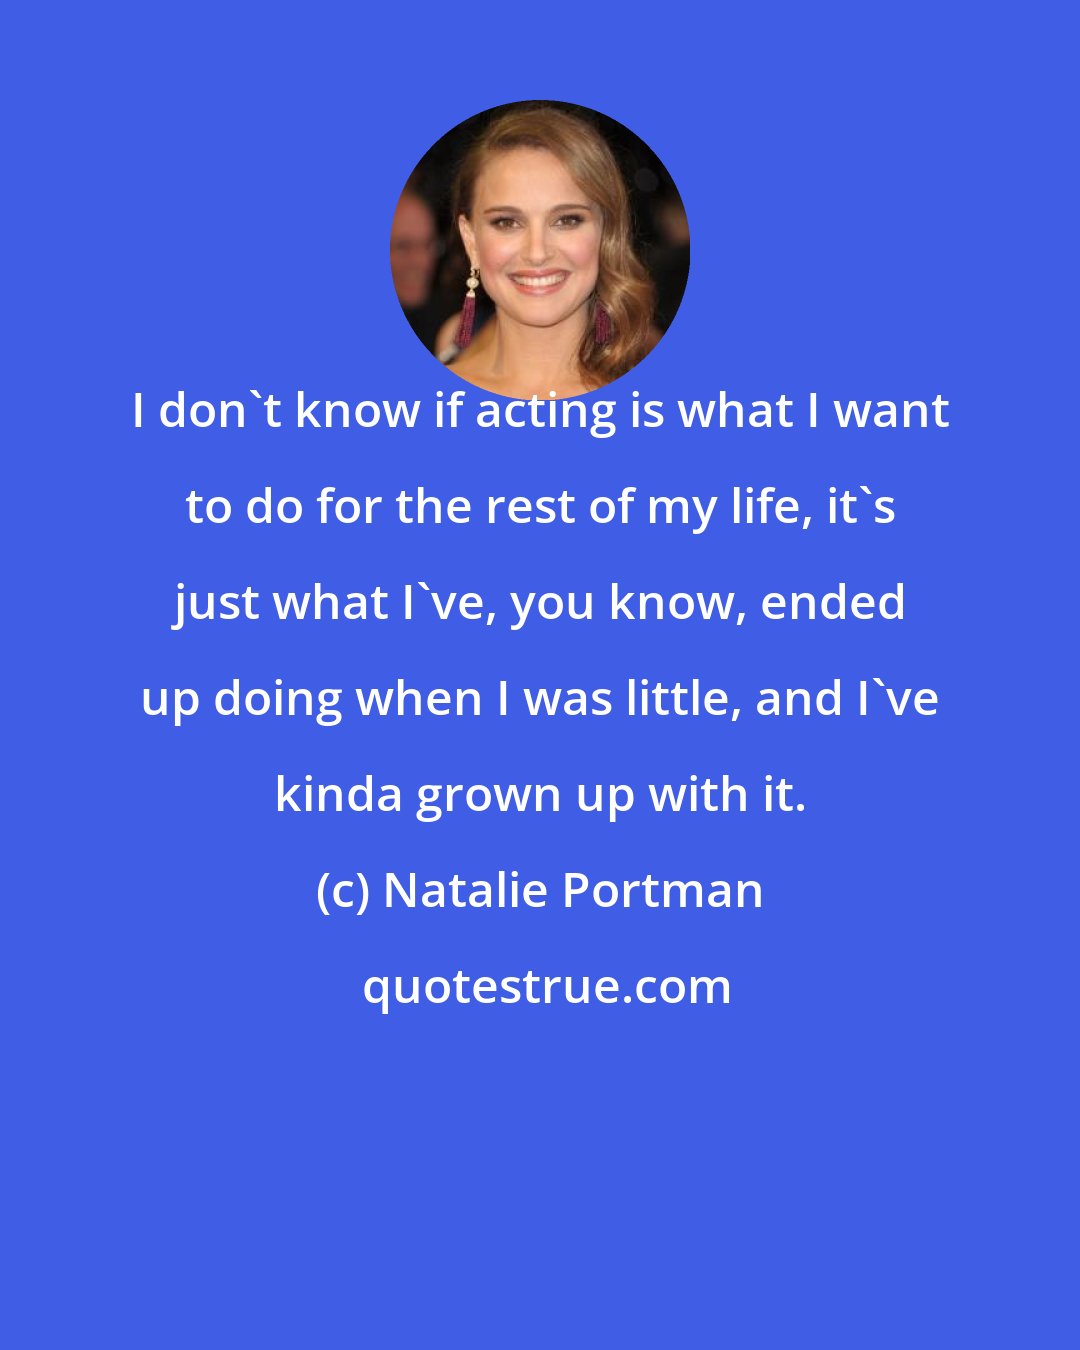 Natalie Portman: I don't know if acting is what I want to do for the rest of my life, it's just what I've, you know, ended up doing when I was little, and I've kinda grown up with it.